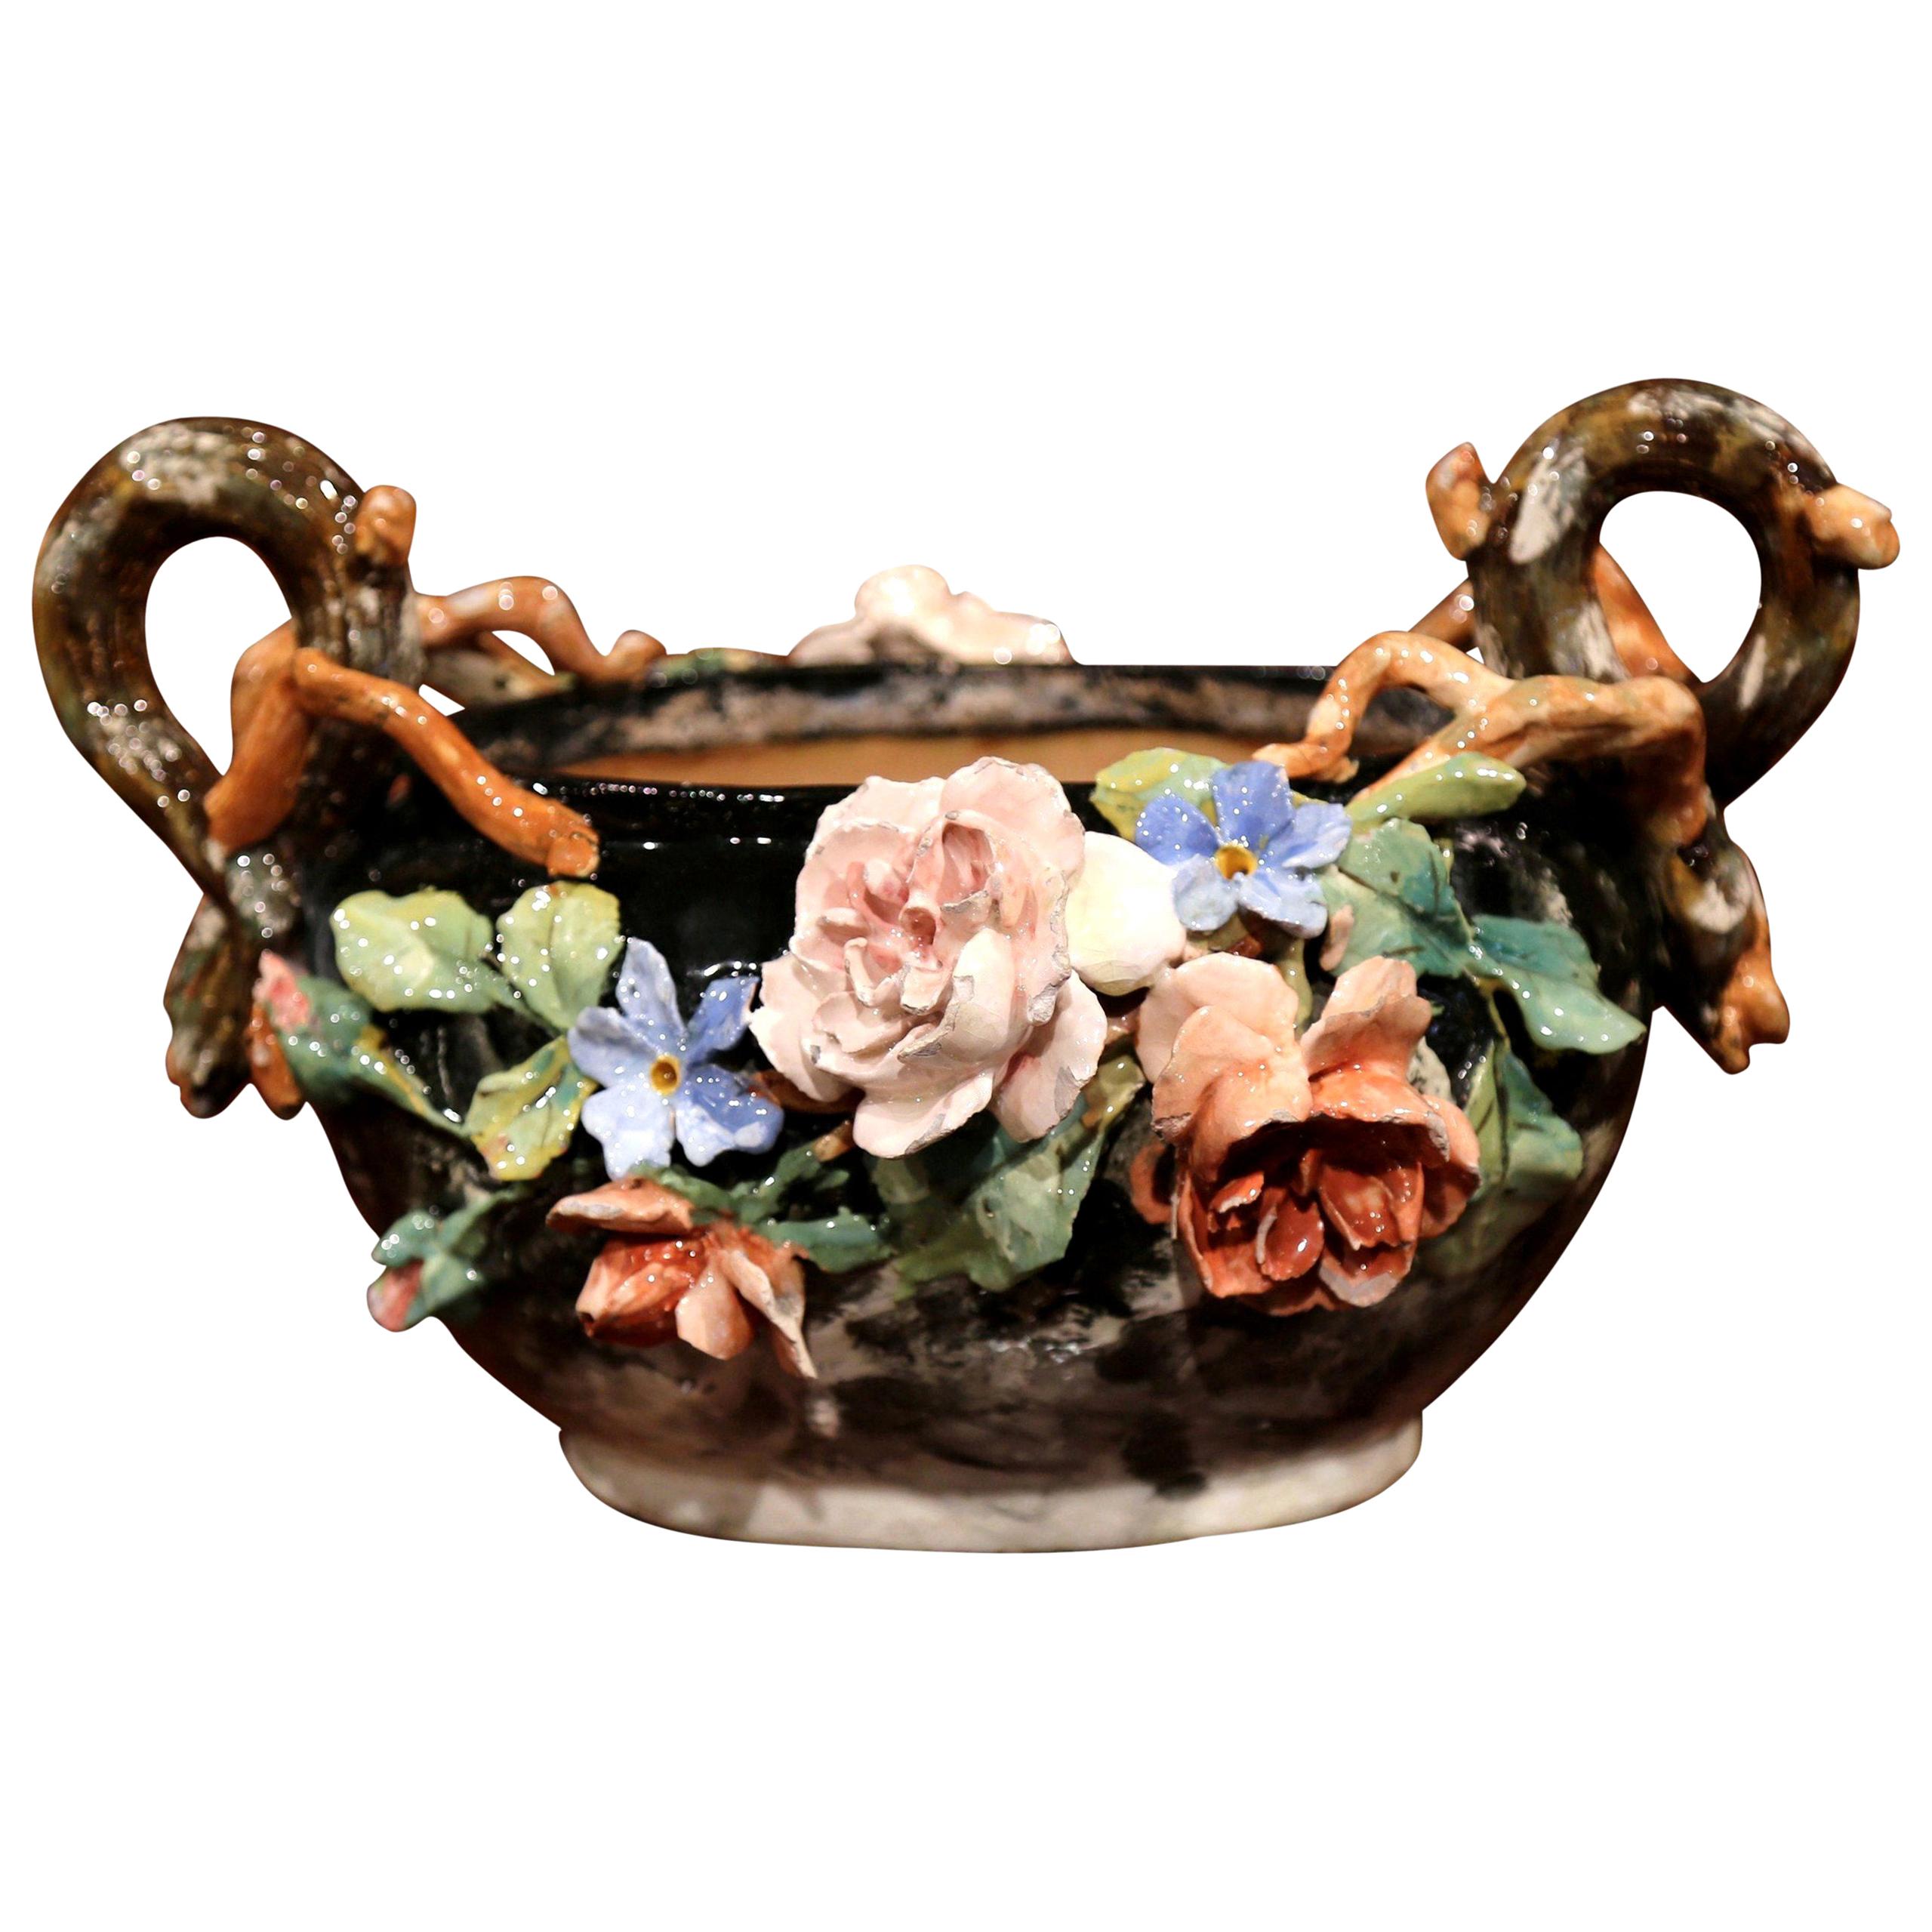 19th Century French Painted Ceramic Barbotine Jardinière with Floral Decor